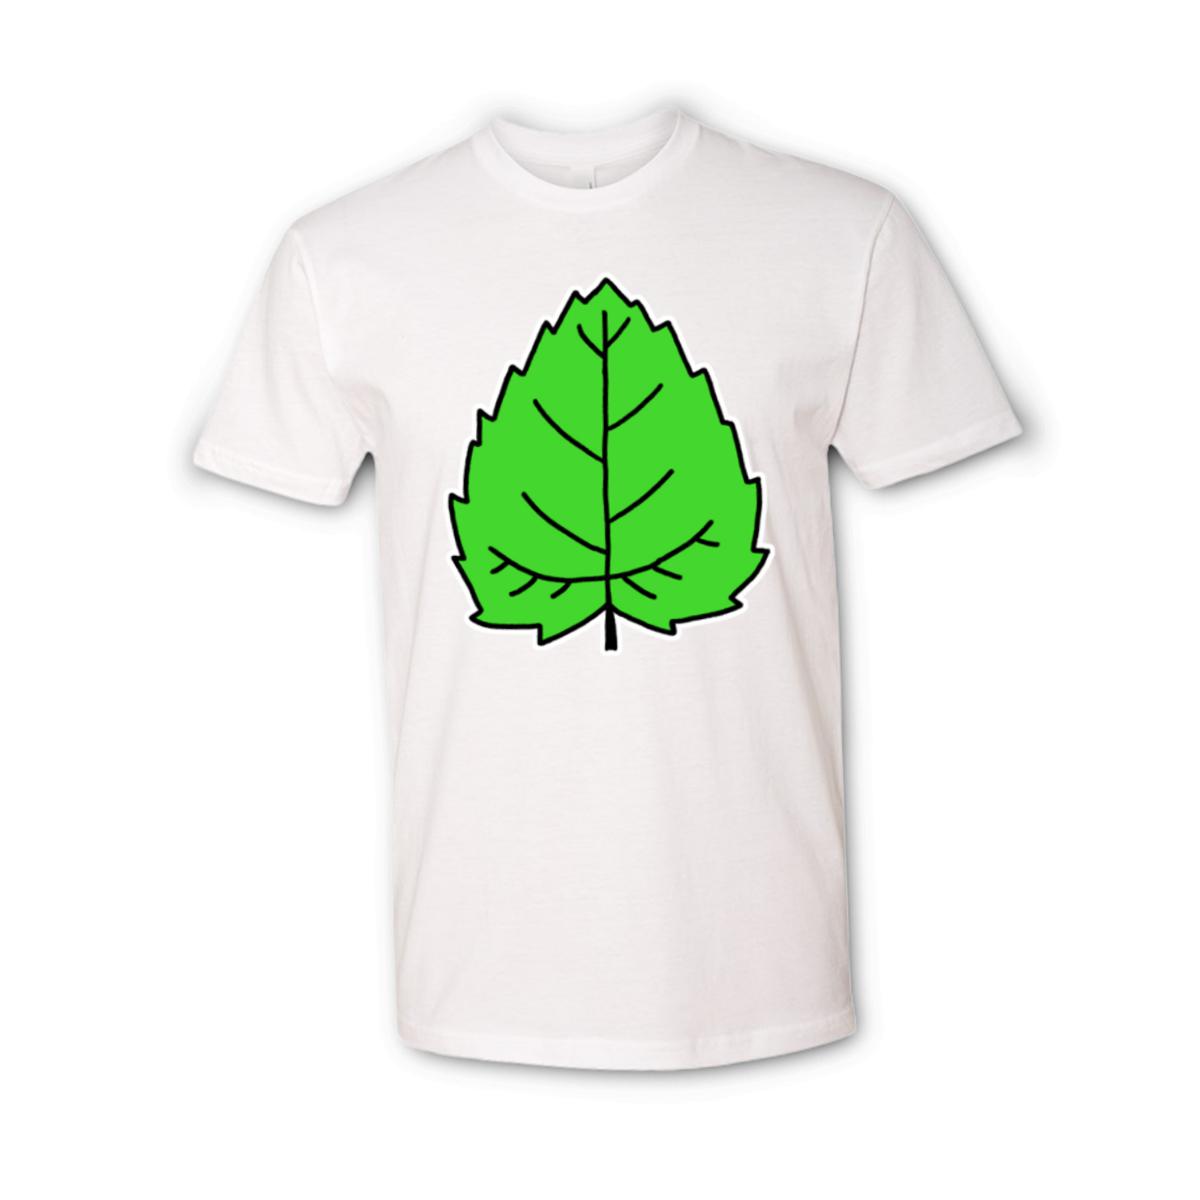 Mulberry Leaf Unisex Tee Small white